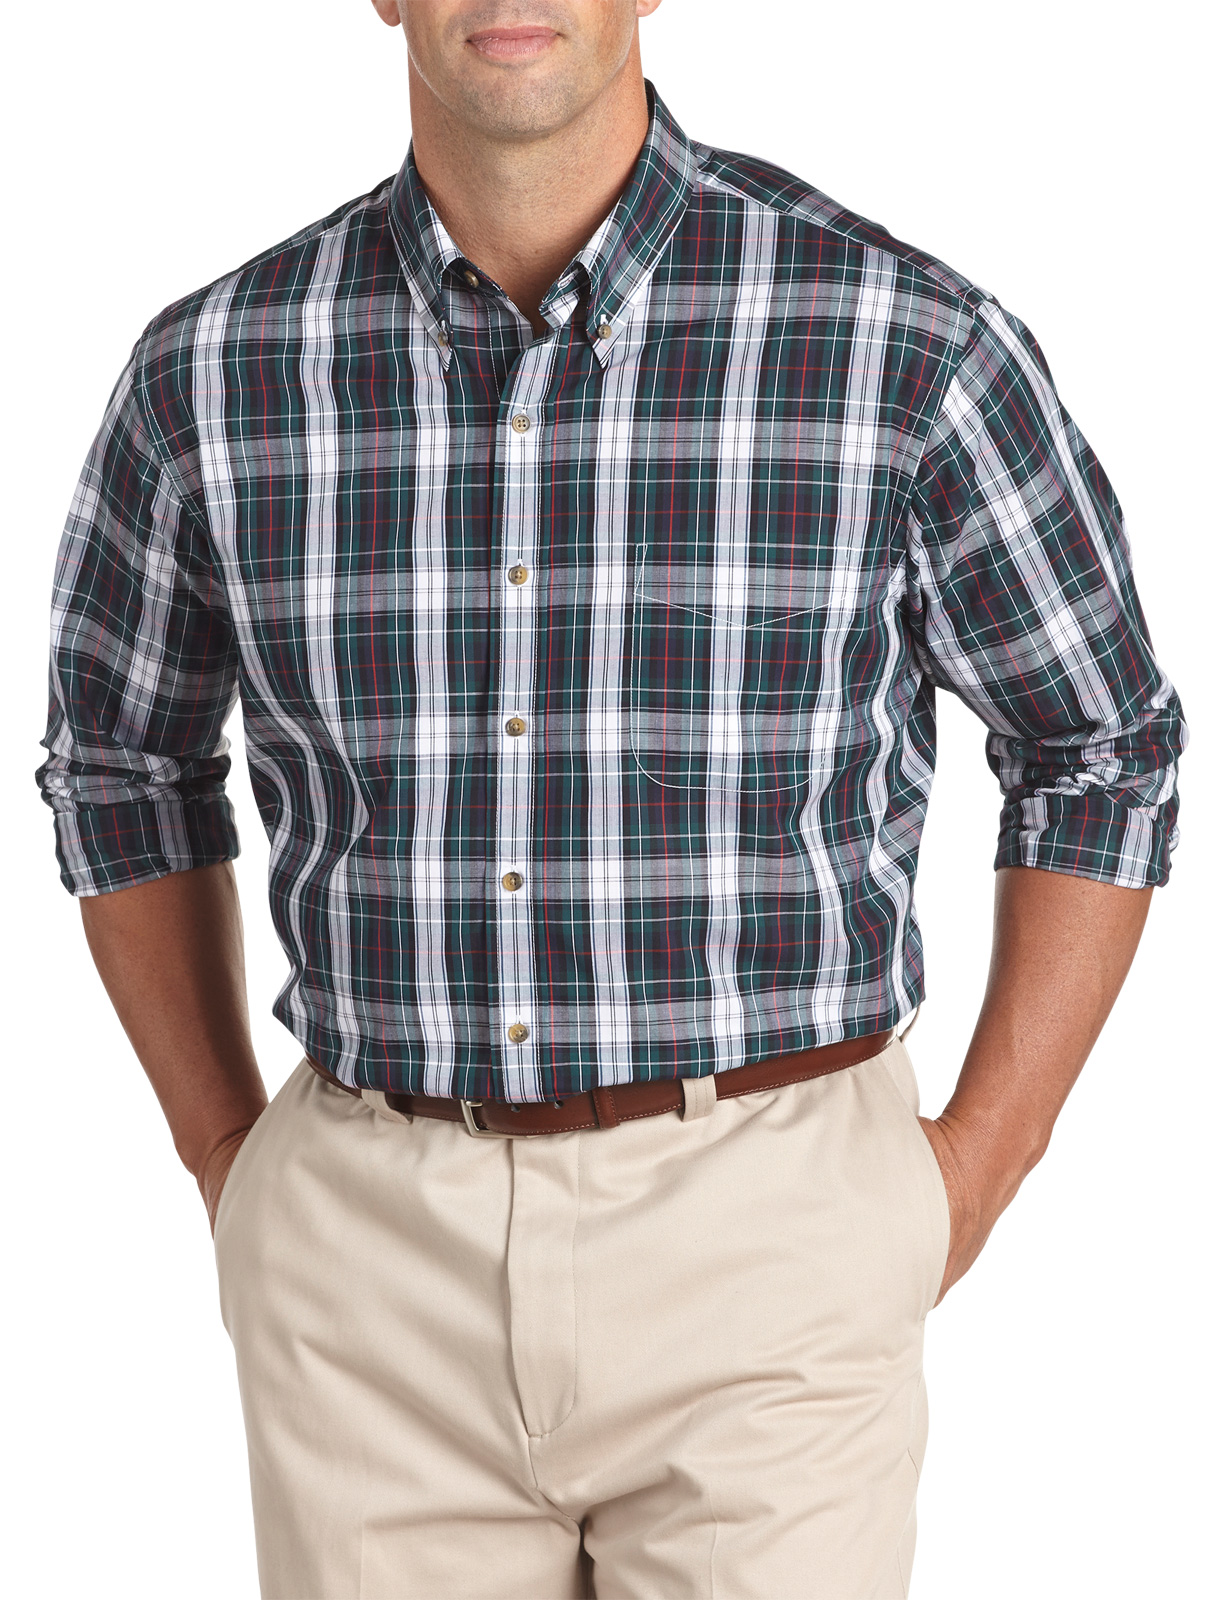 Harbor Bay Men's Big and Tall Easy-Care Plaid Sport Shirt